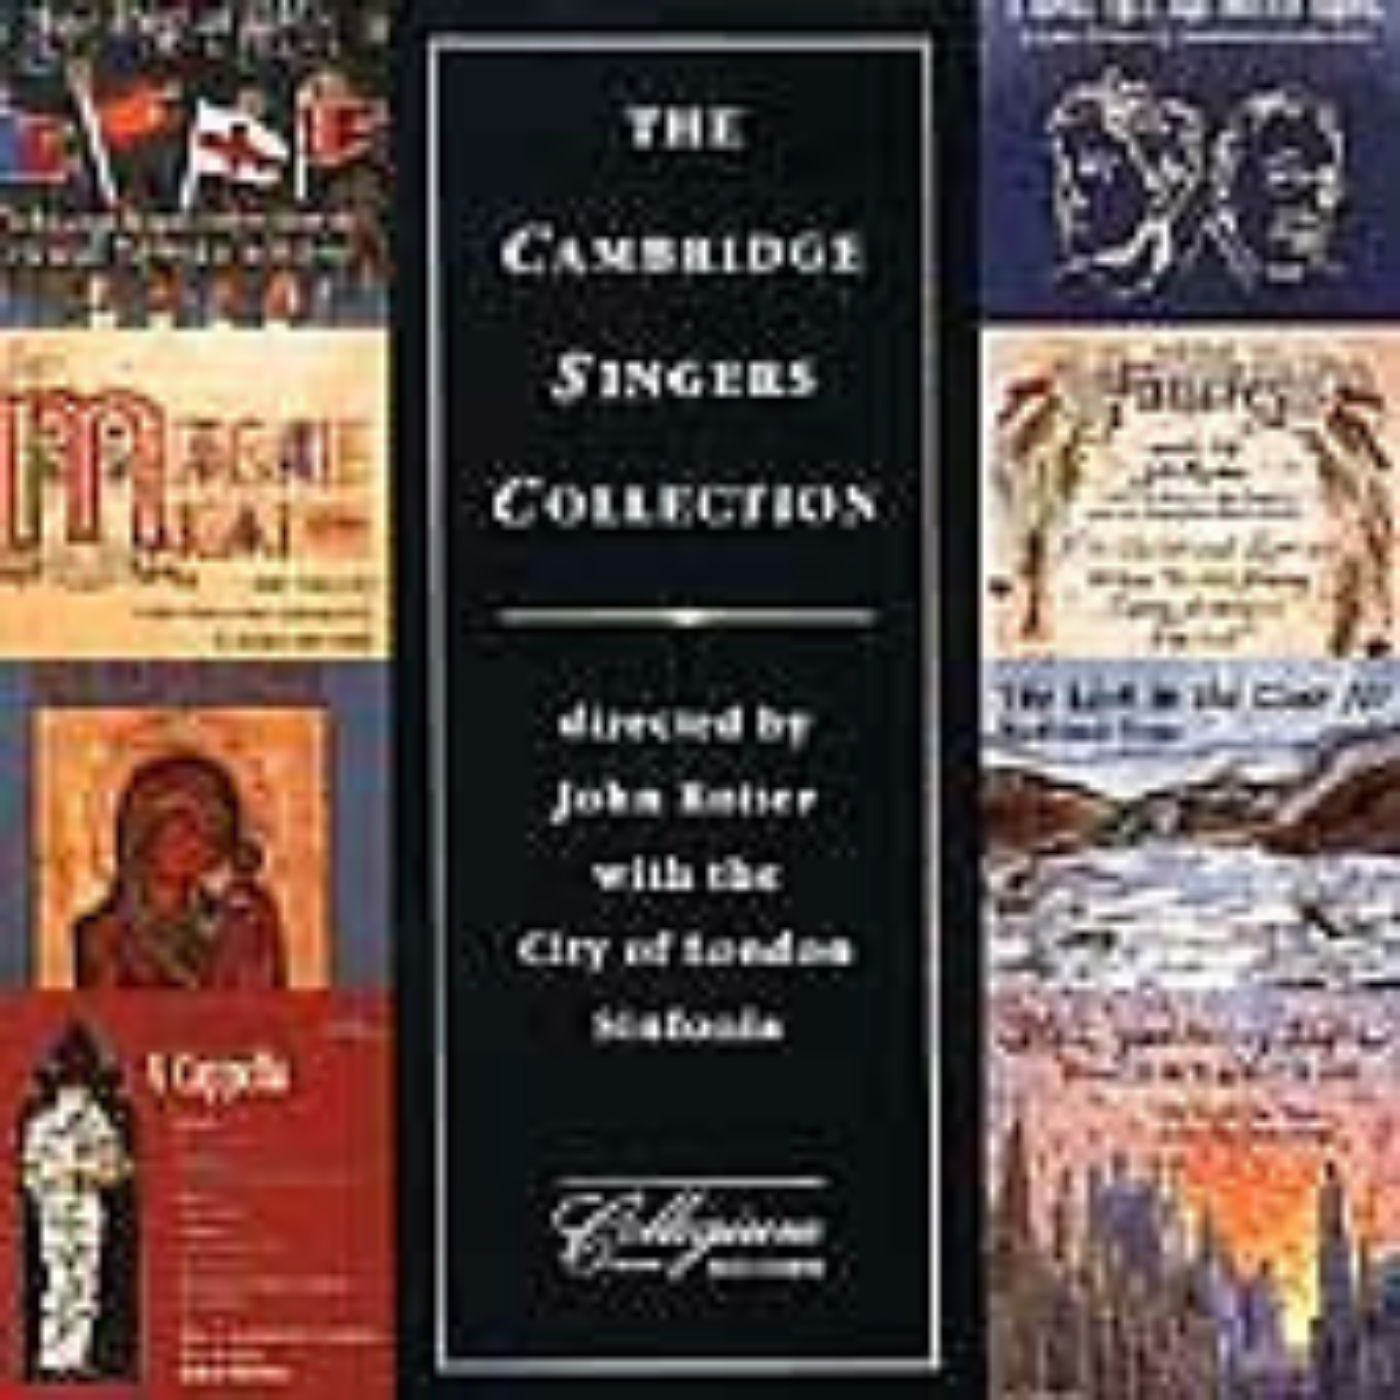 THE CAMBRIDGE SINGERS COLLECTION with guests The King's Singers, Richard Baker, Richard Hickox